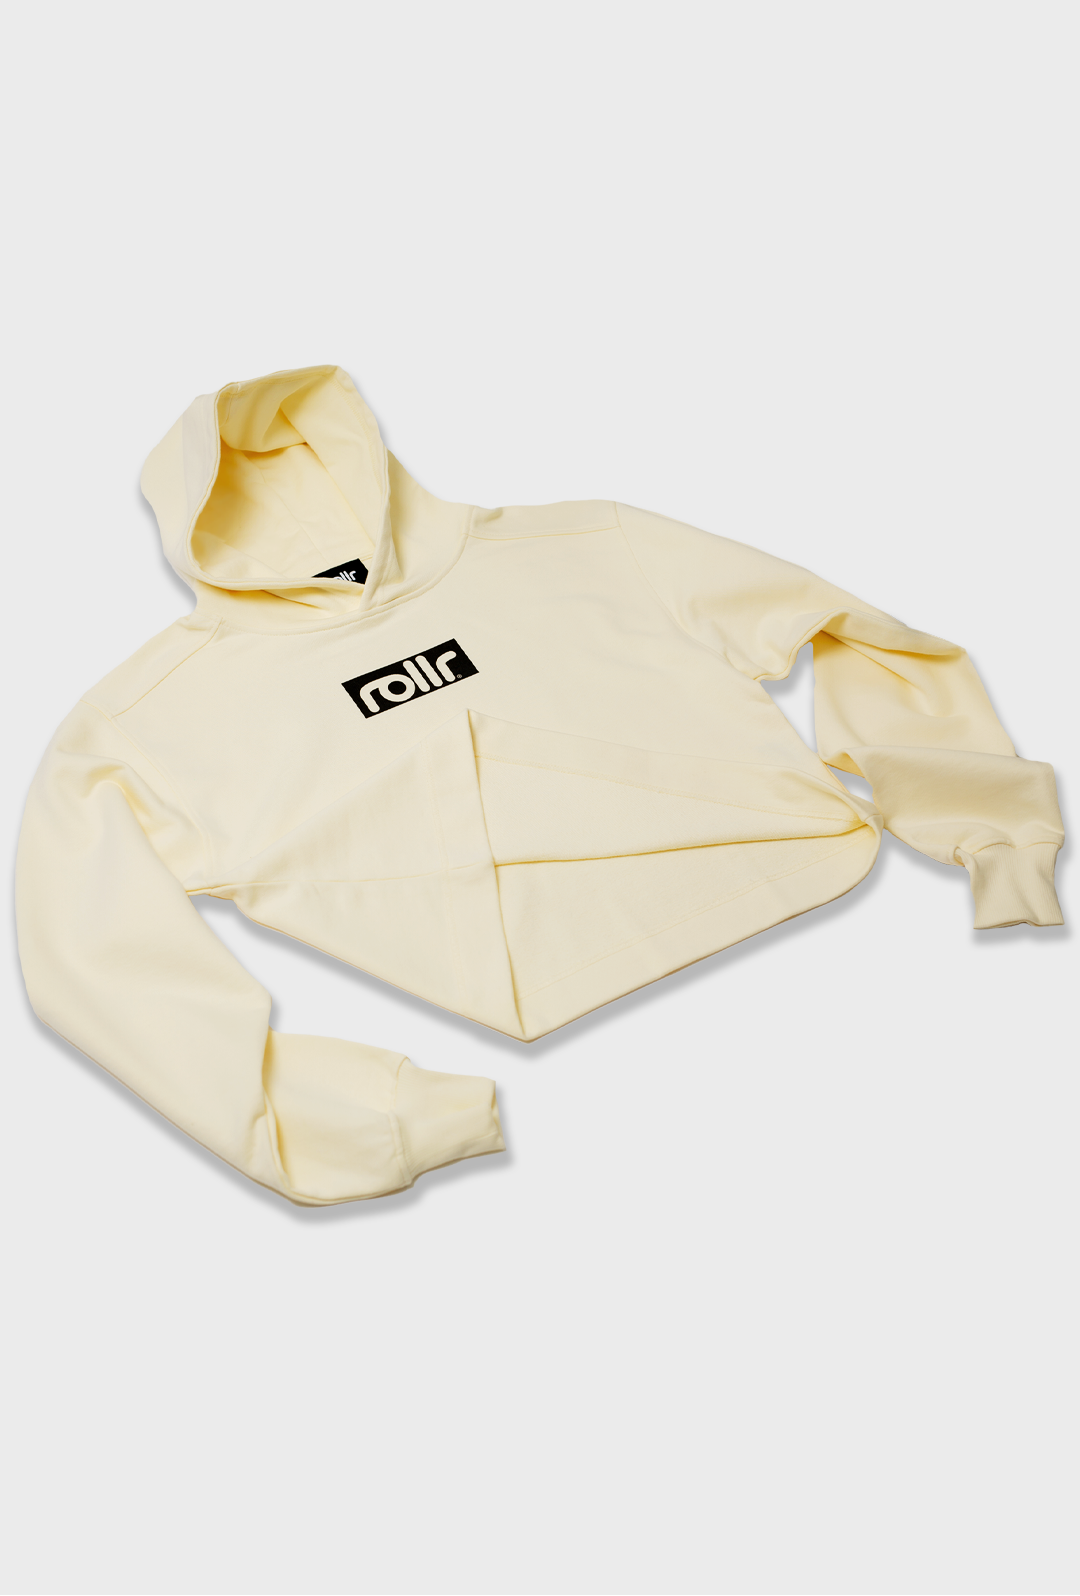 rollr vanilla cream box fit womens cropped hoodie made from french terry 100% organic cotton and hood